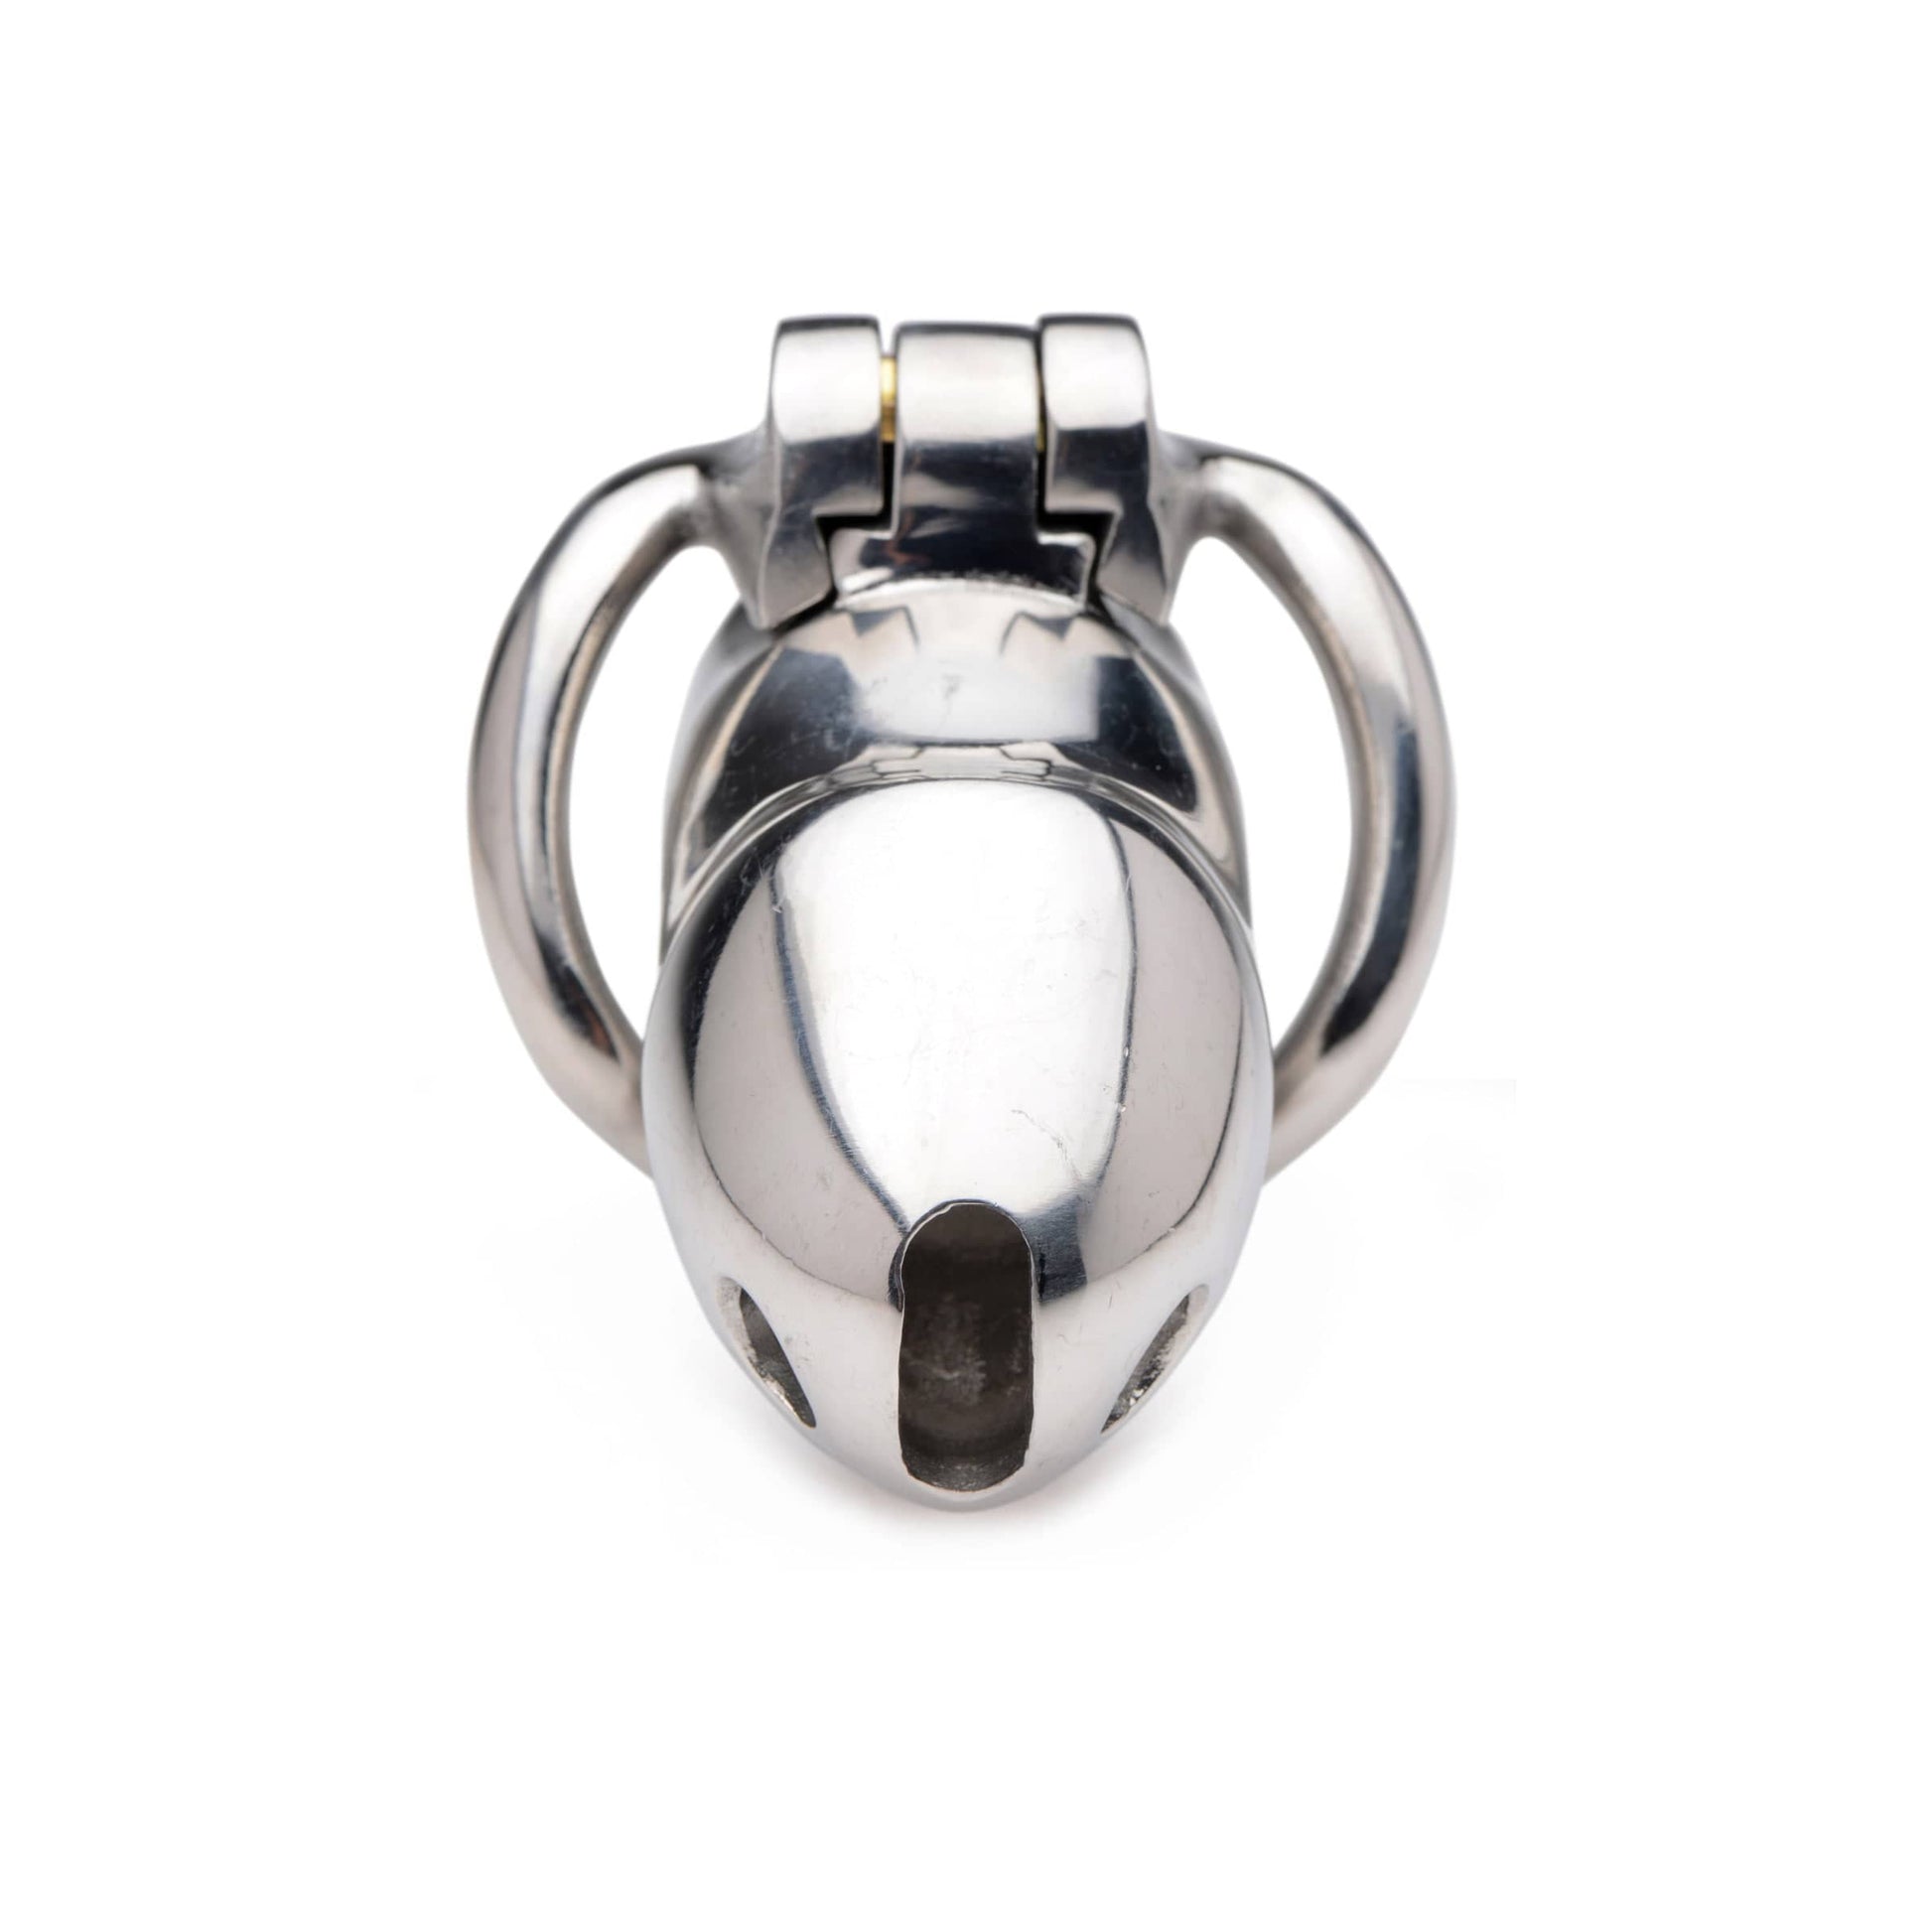 Midas 18k Gold-plated Locking Chastity Cage - The Haus of Shag